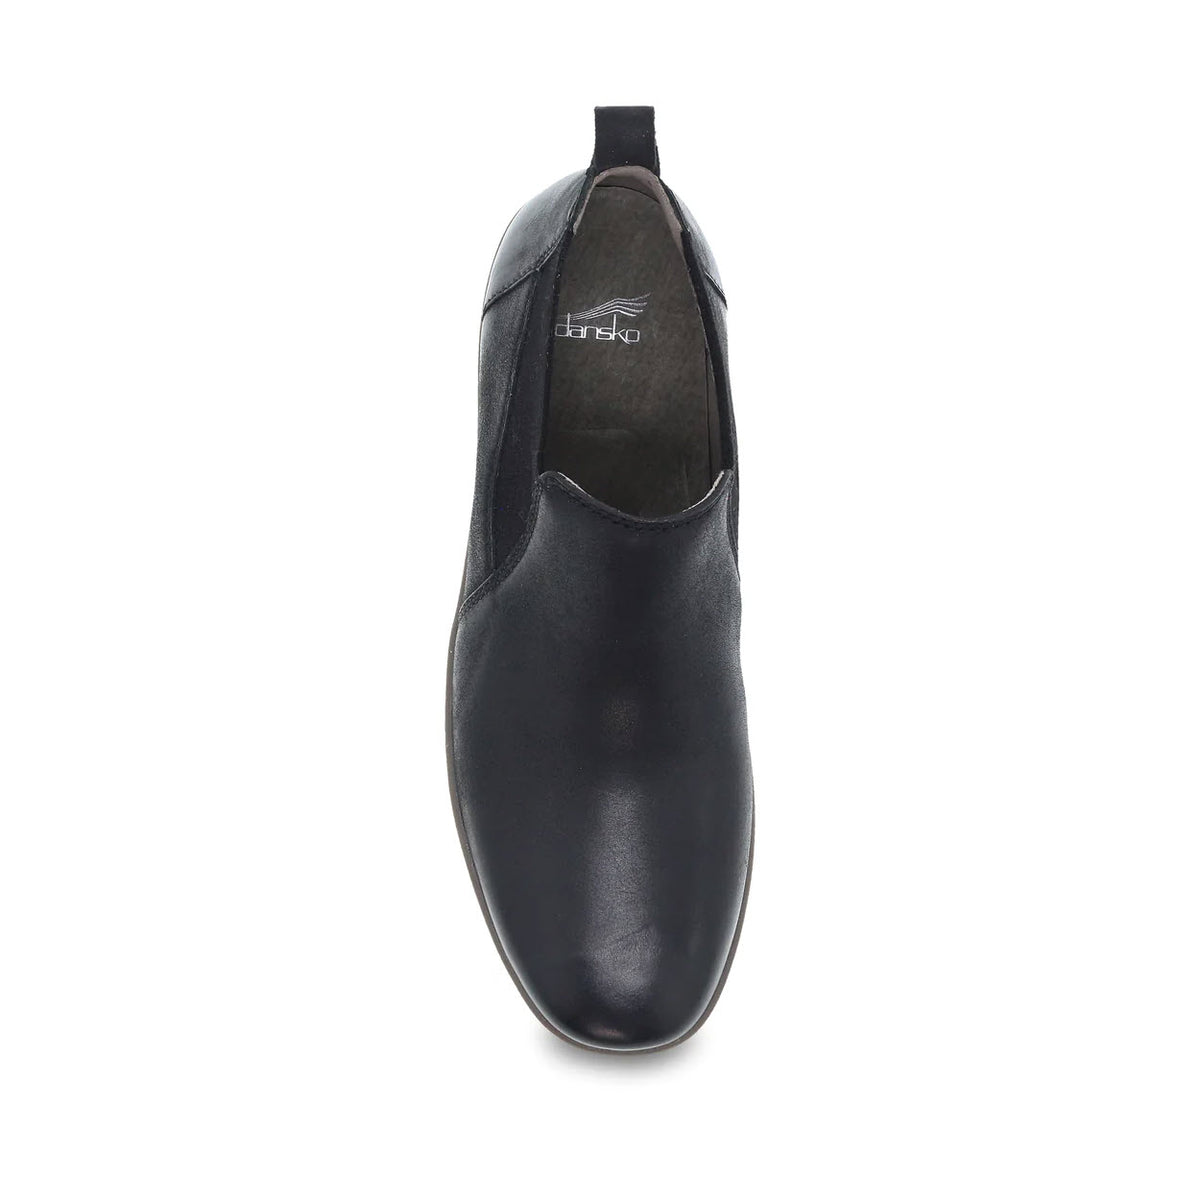 Dansko black leather low-top bootie with elastic side panels viewed from the top on a white background.